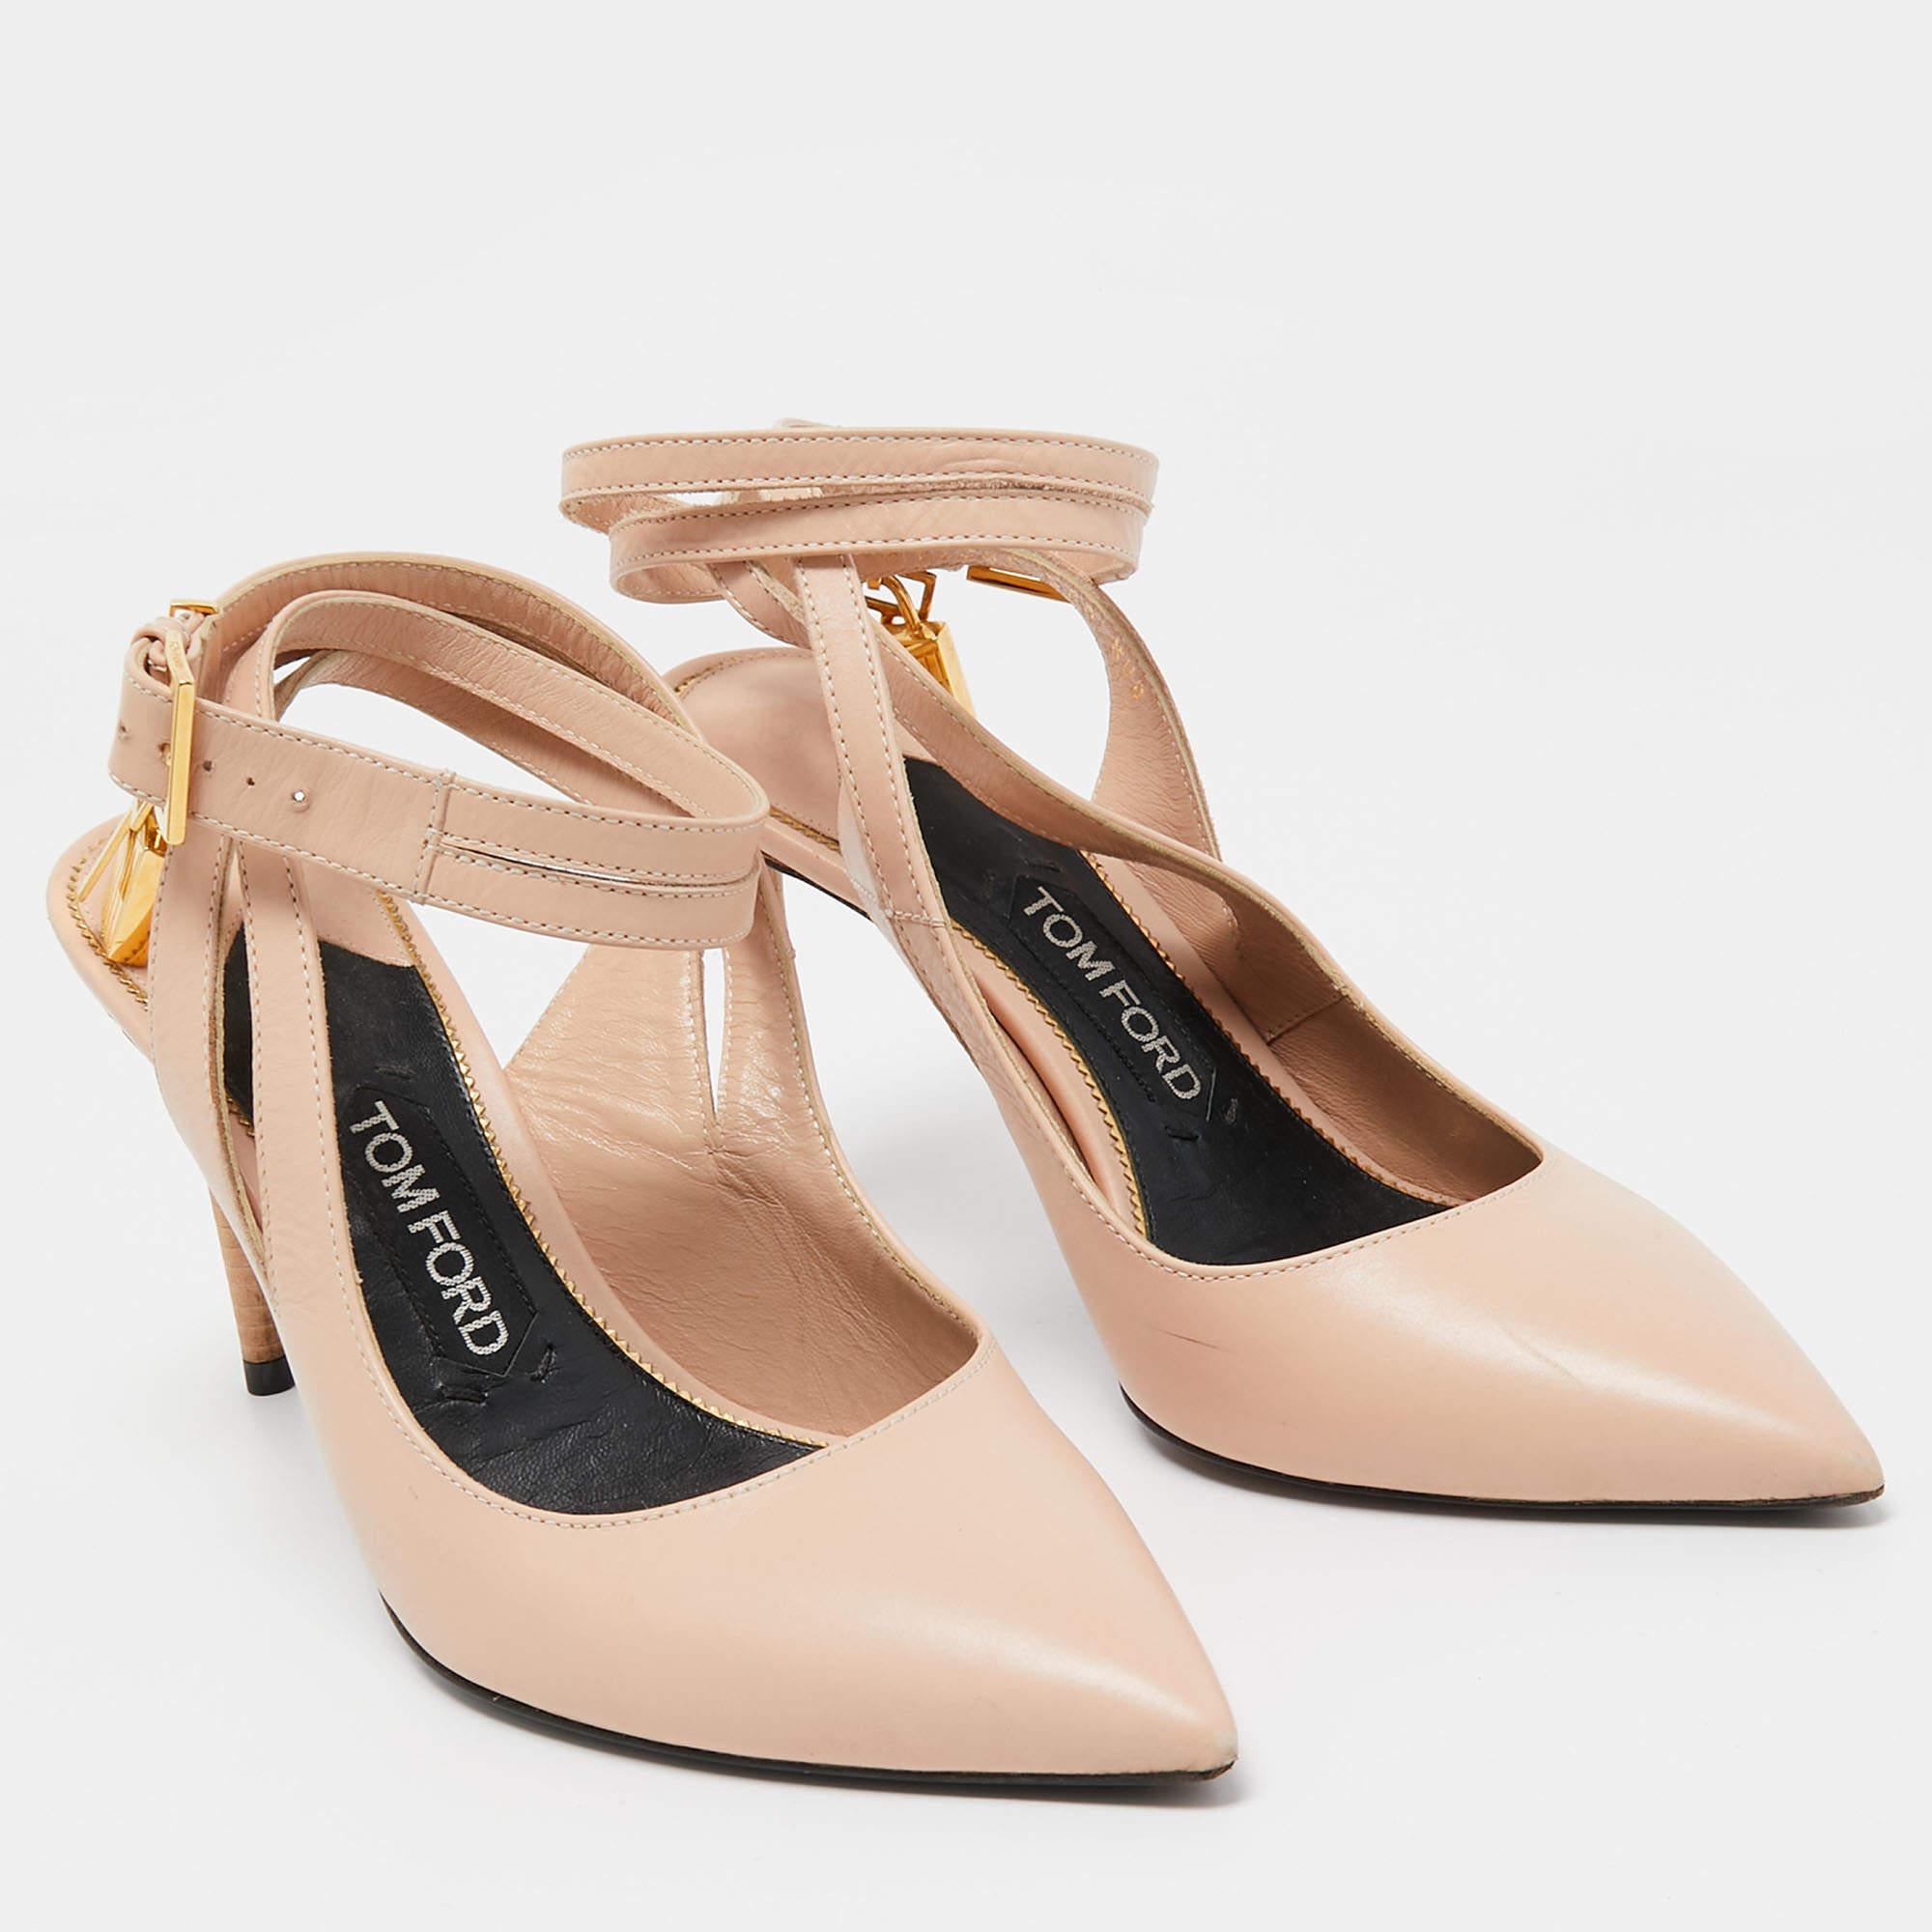 Tom Ford Beige Leather Padlock Pumps Size 39 For Sale 3